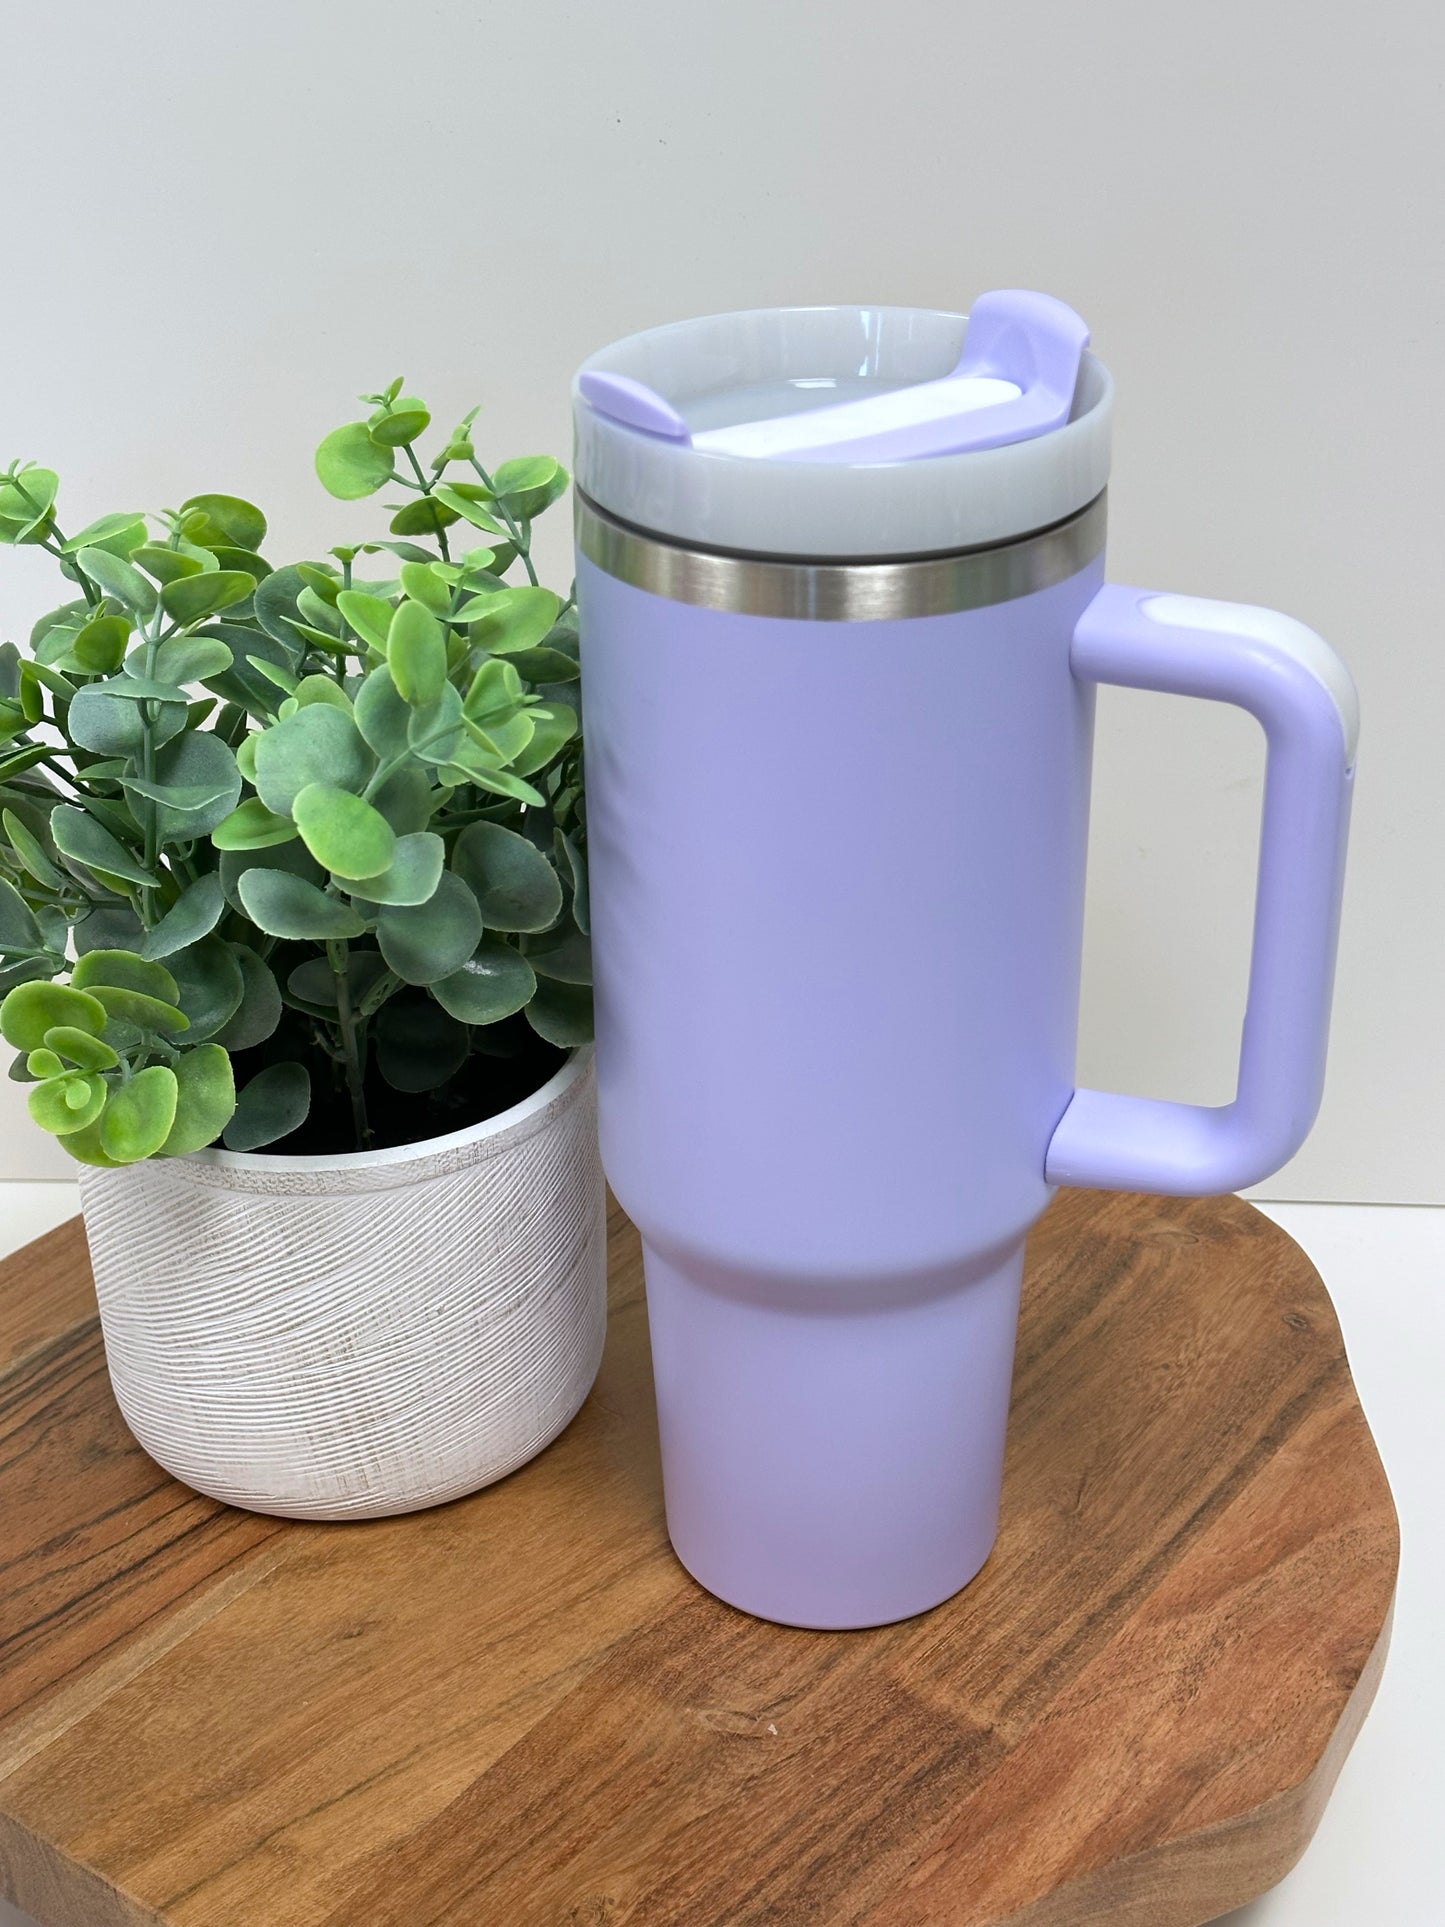 40oz Matte Tumbler With Handle and Straw, 40oz White Tumbler, 40oz Tan  Tumbler, 40oz Blush Tumbler, 40oz Light Blue Tumbler 